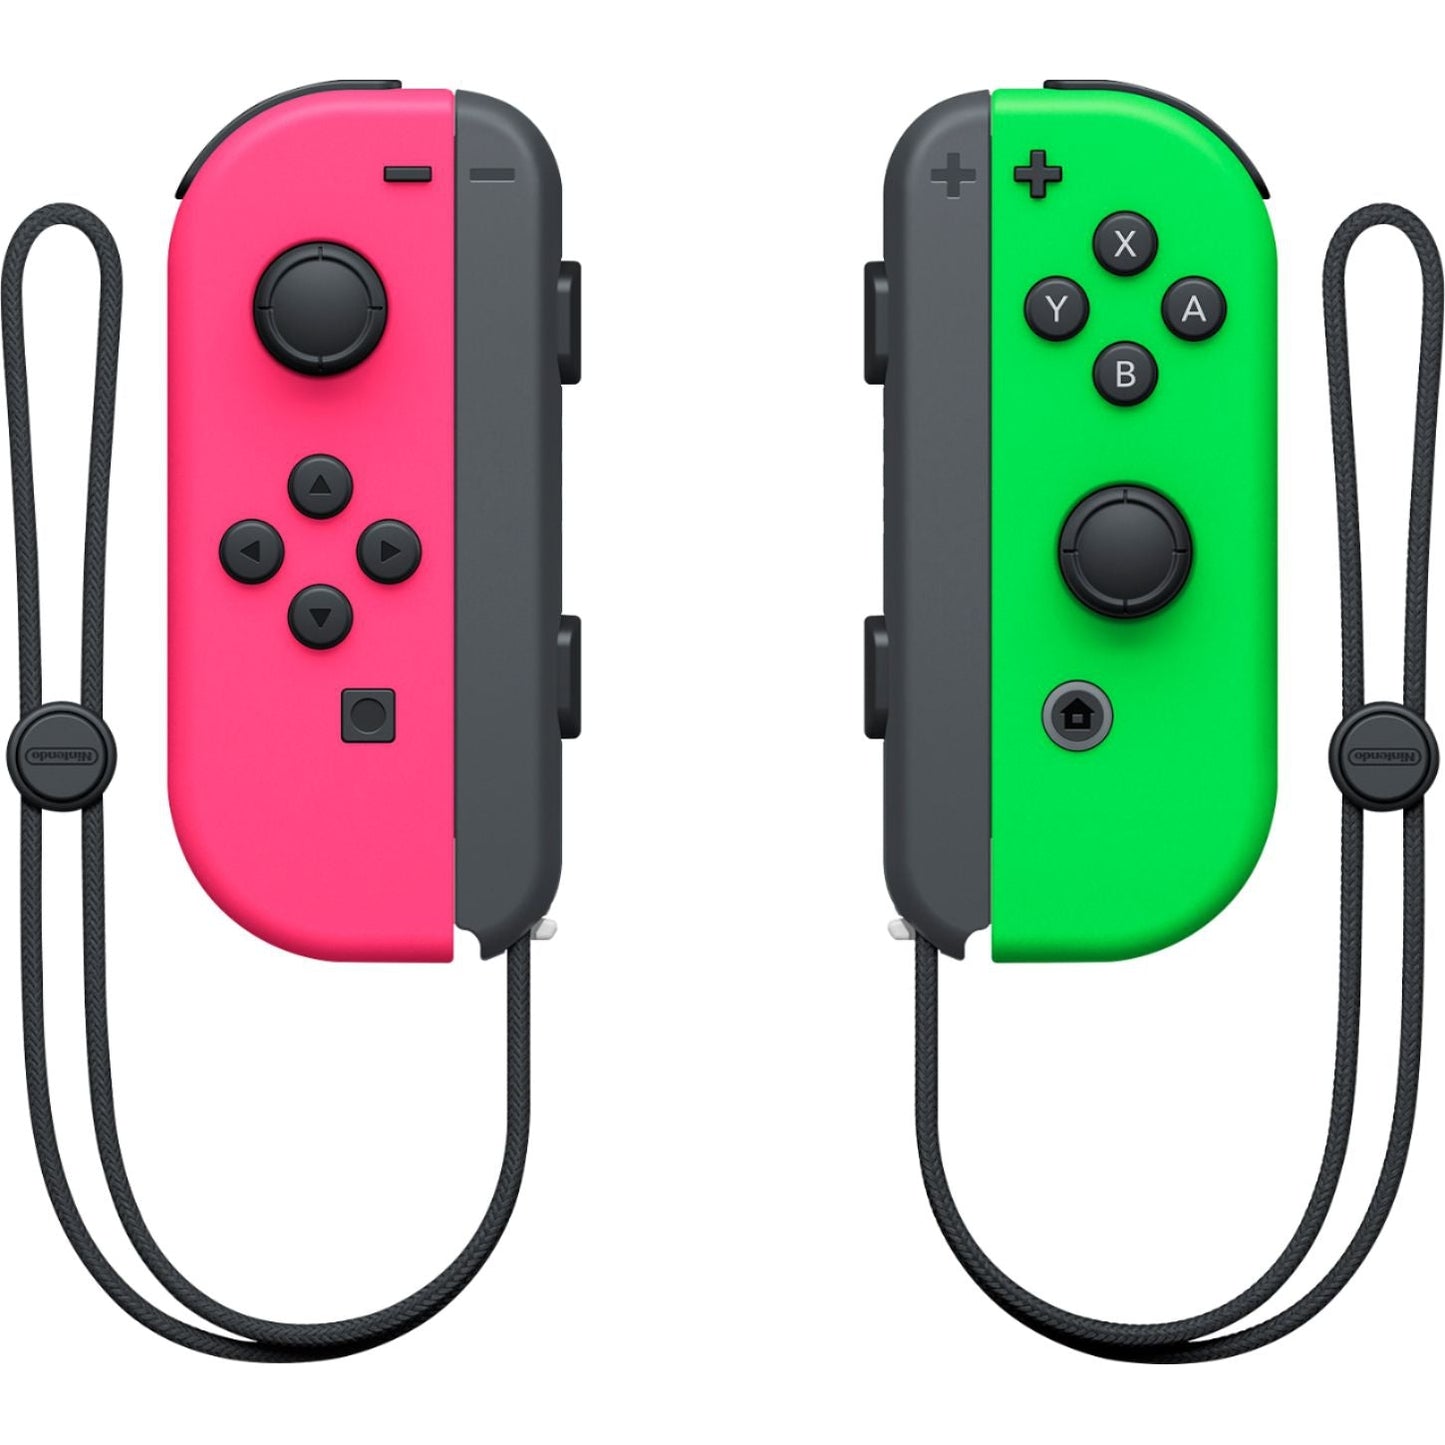 Nintendo Wireless Controllers for Switch, Neon Pink/ Neon Green